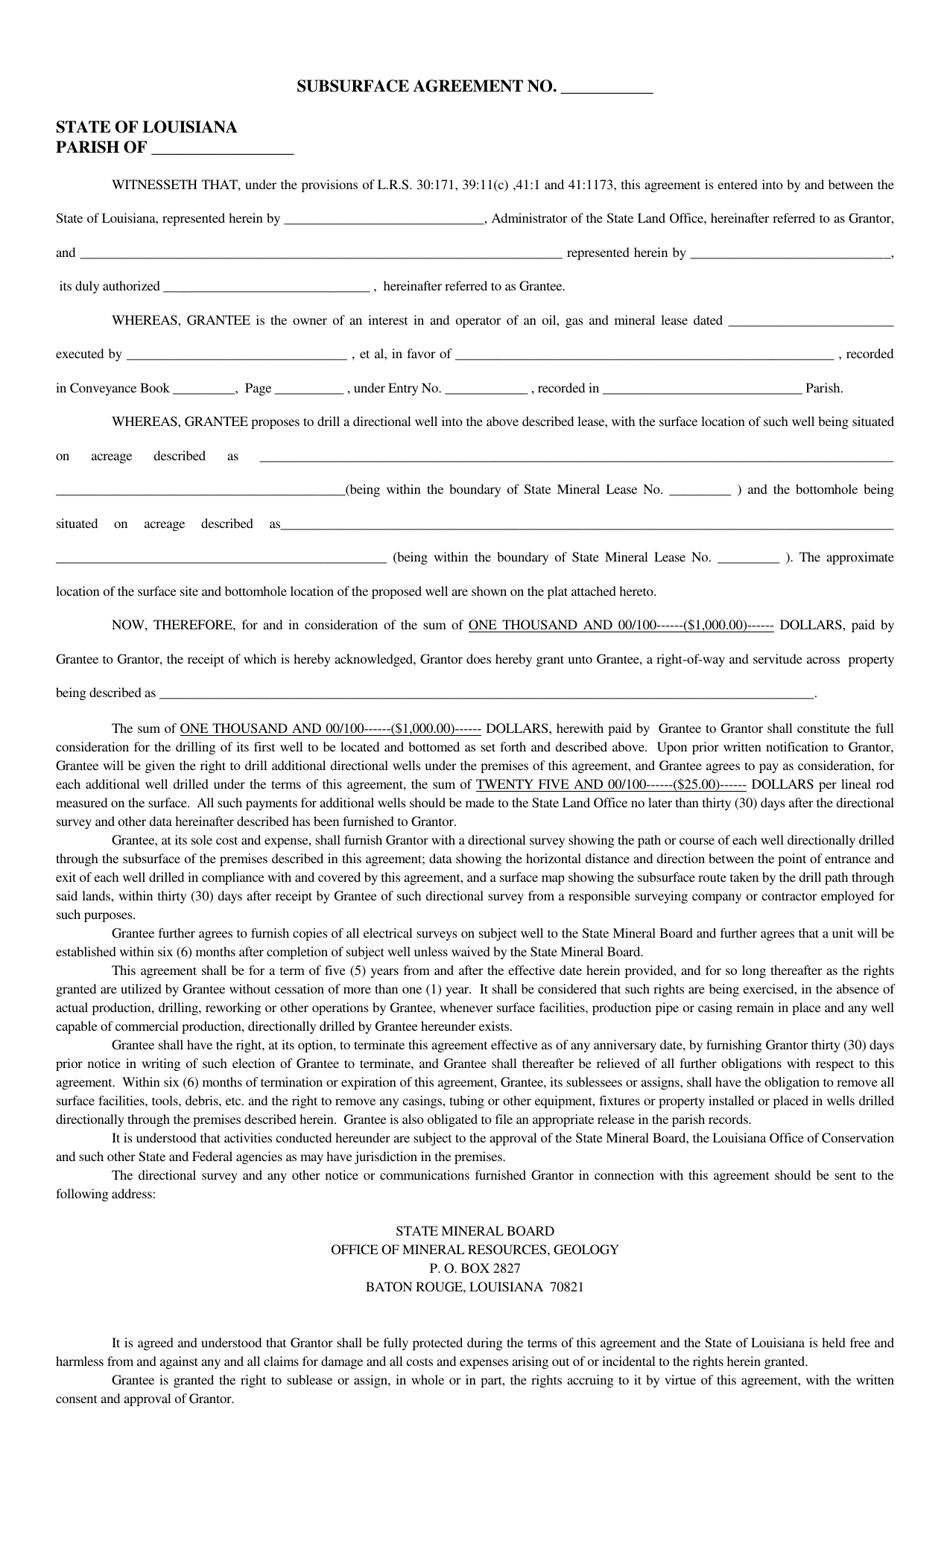 Subsurface Agreement - Louisiana, Page 1